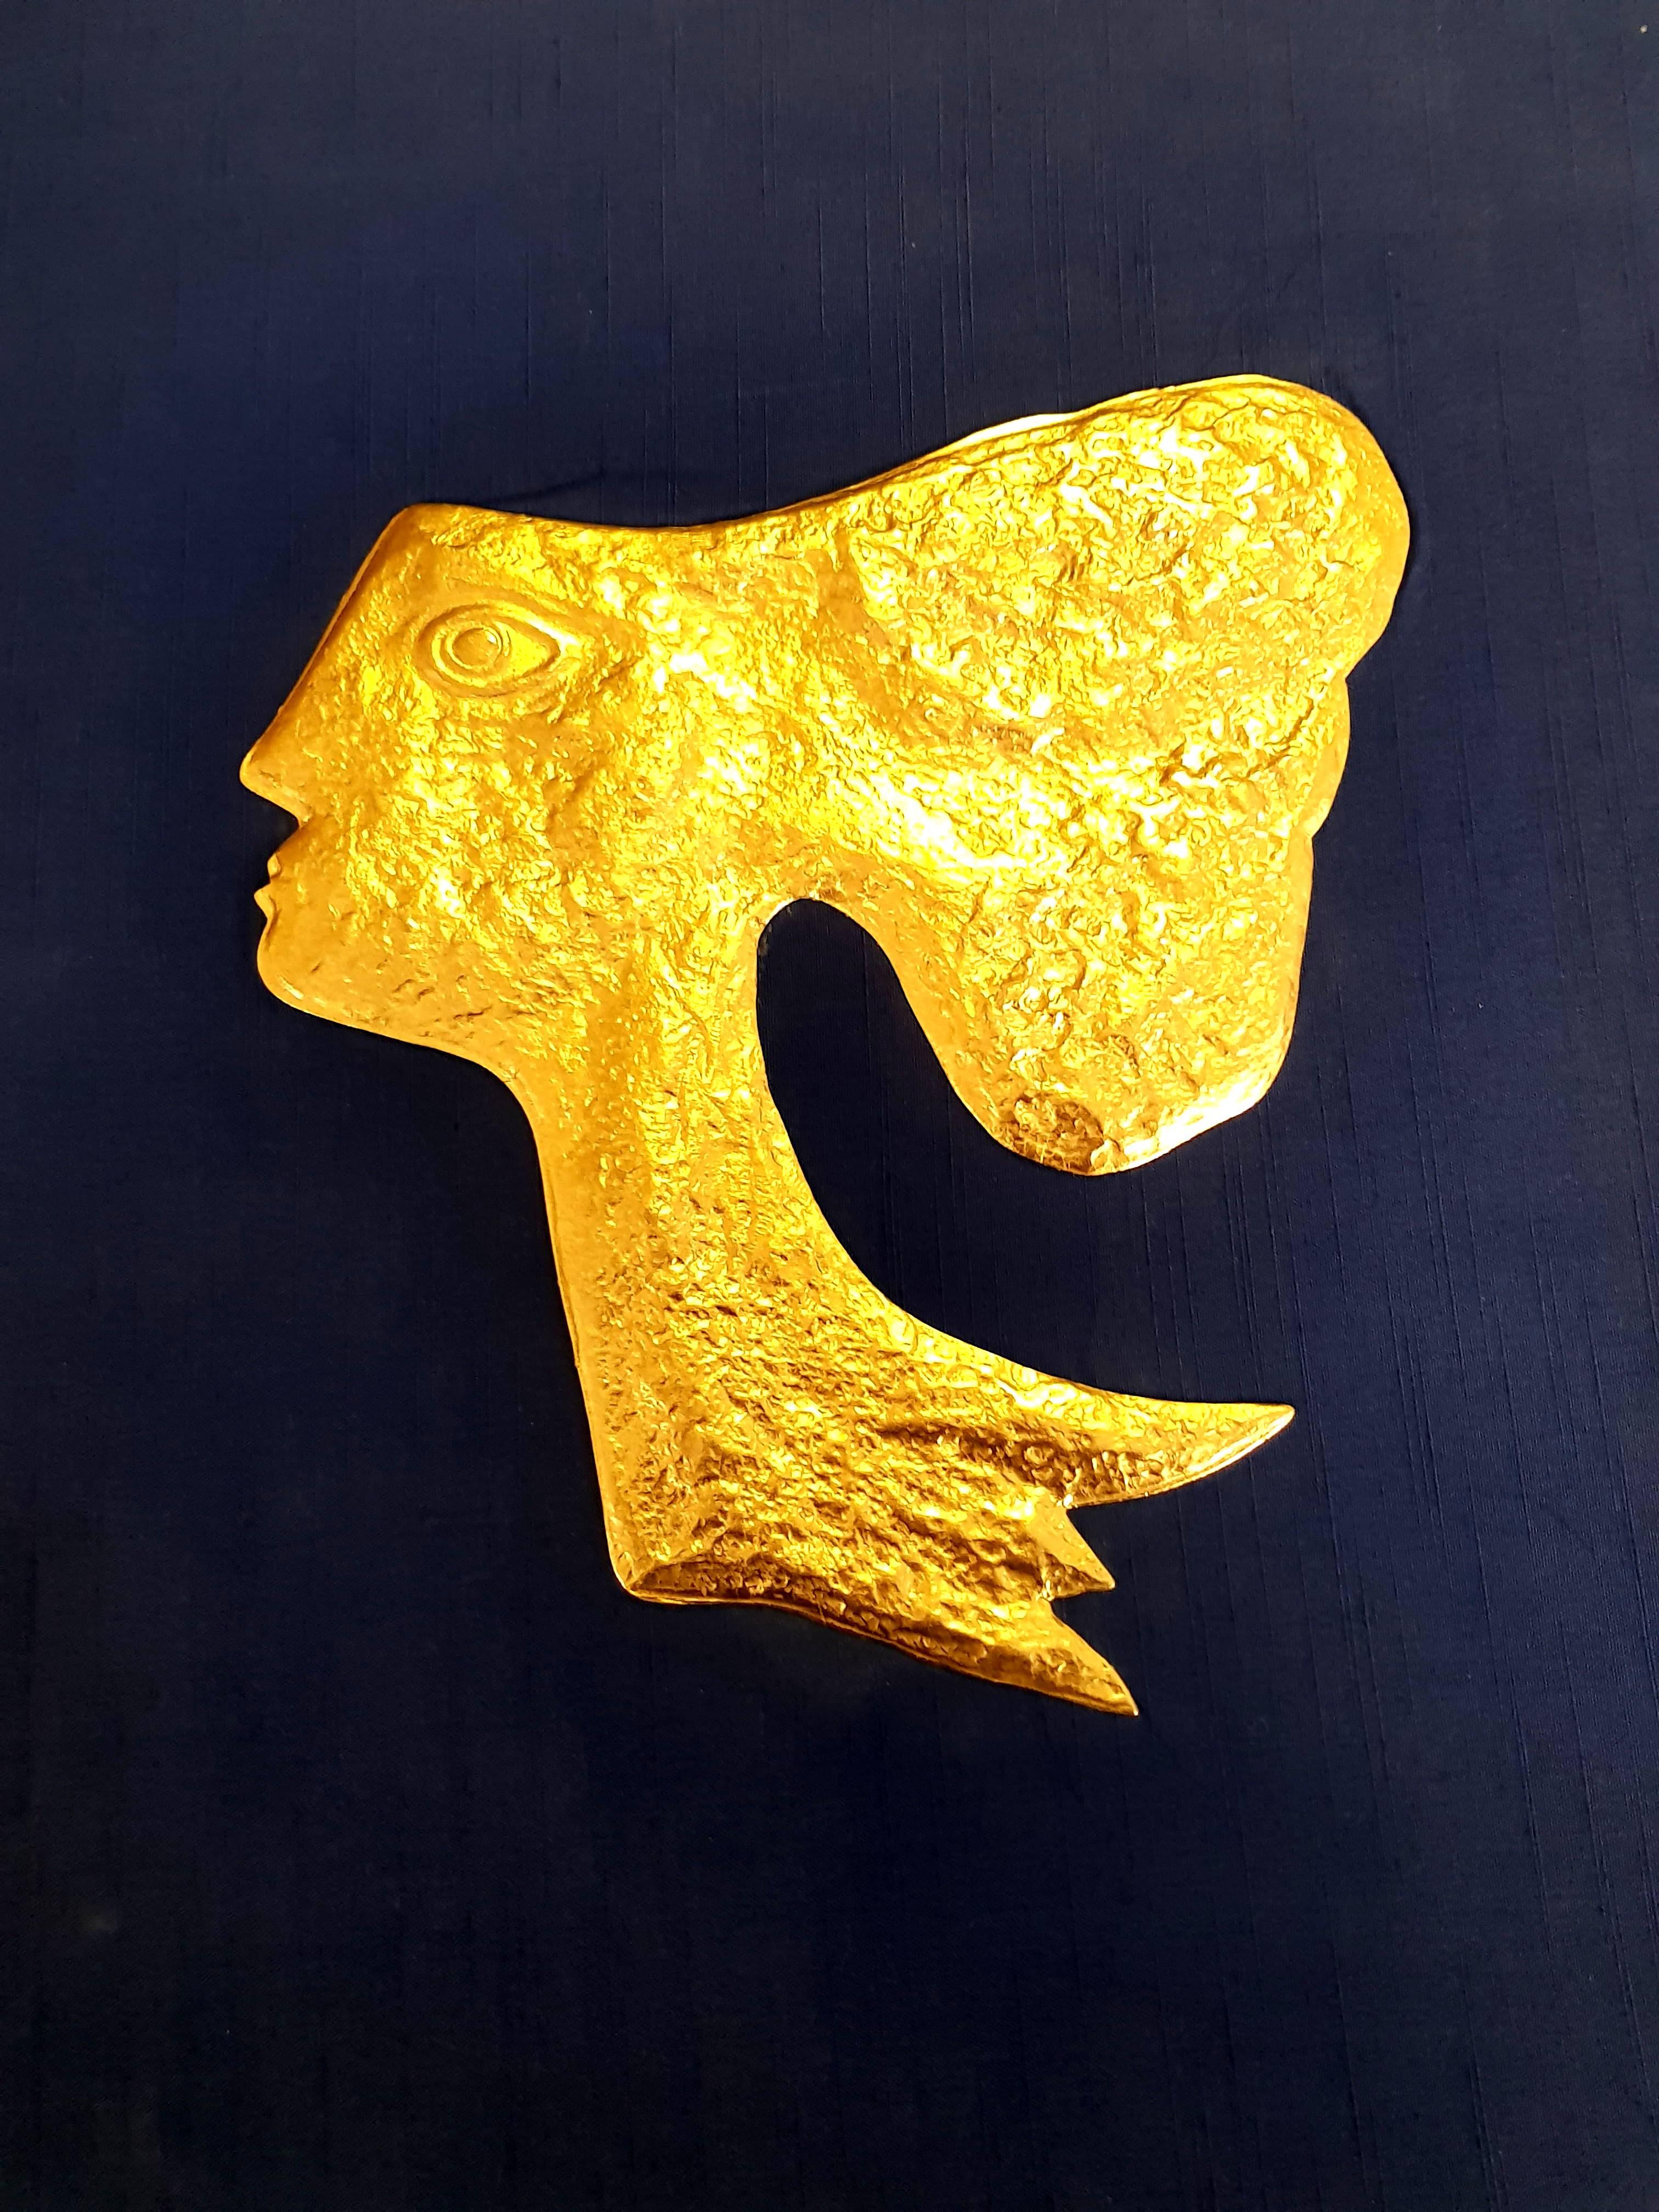 Georges Braque (after) - 12 Gold Leaf Enhanced Etchings - Gods  - Print by (after) Georges Braque